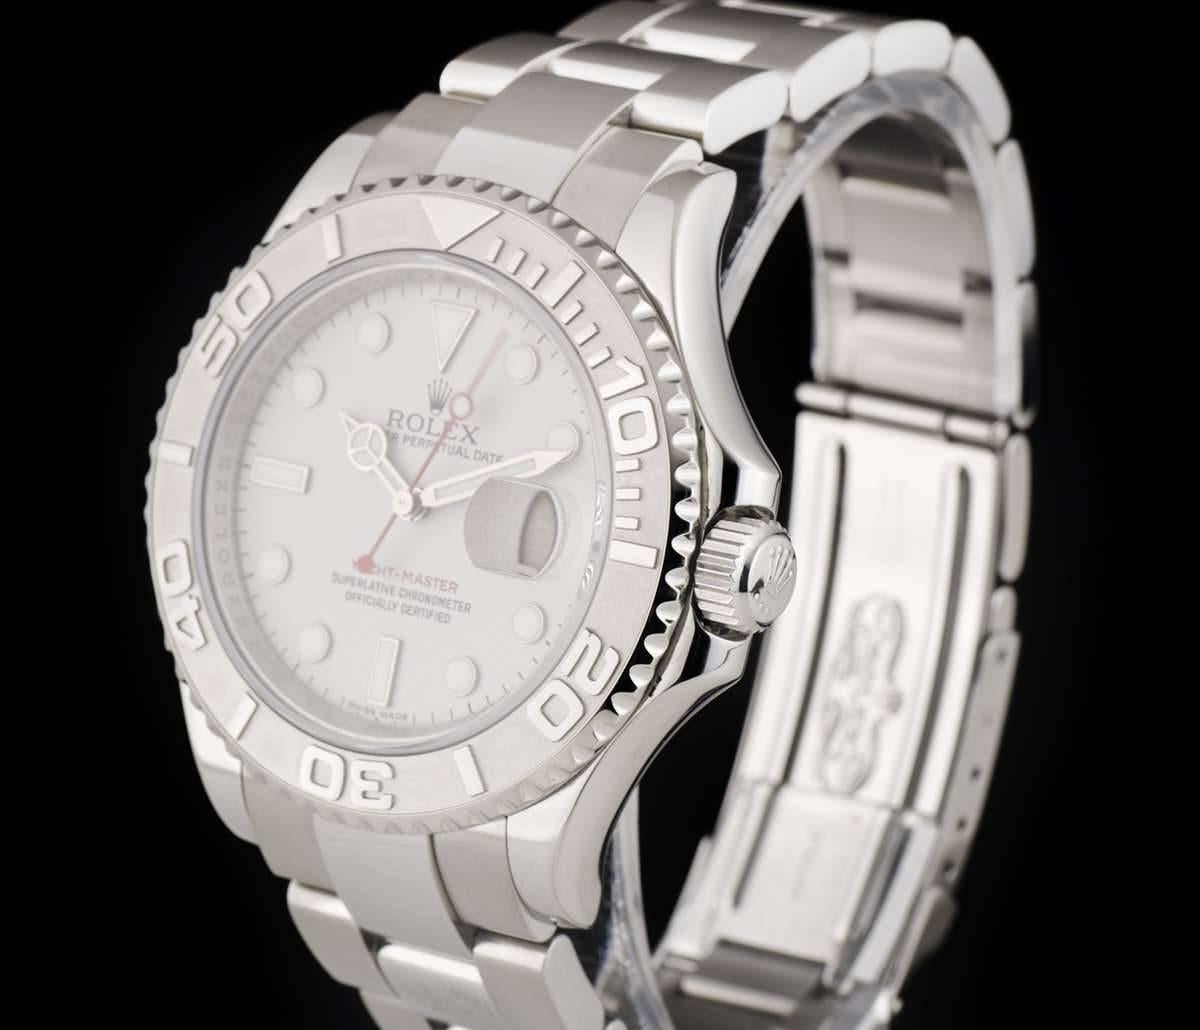 A Stainless Steel Oyster Perpetual Yacht-Master Gents Wristwatch, platinum dial with applied hour markers, date at 3 0'clock, a platinum bi-directional rotating bezel with a platinum bezel insert, a stainless steel oyster bracelet with a stainless